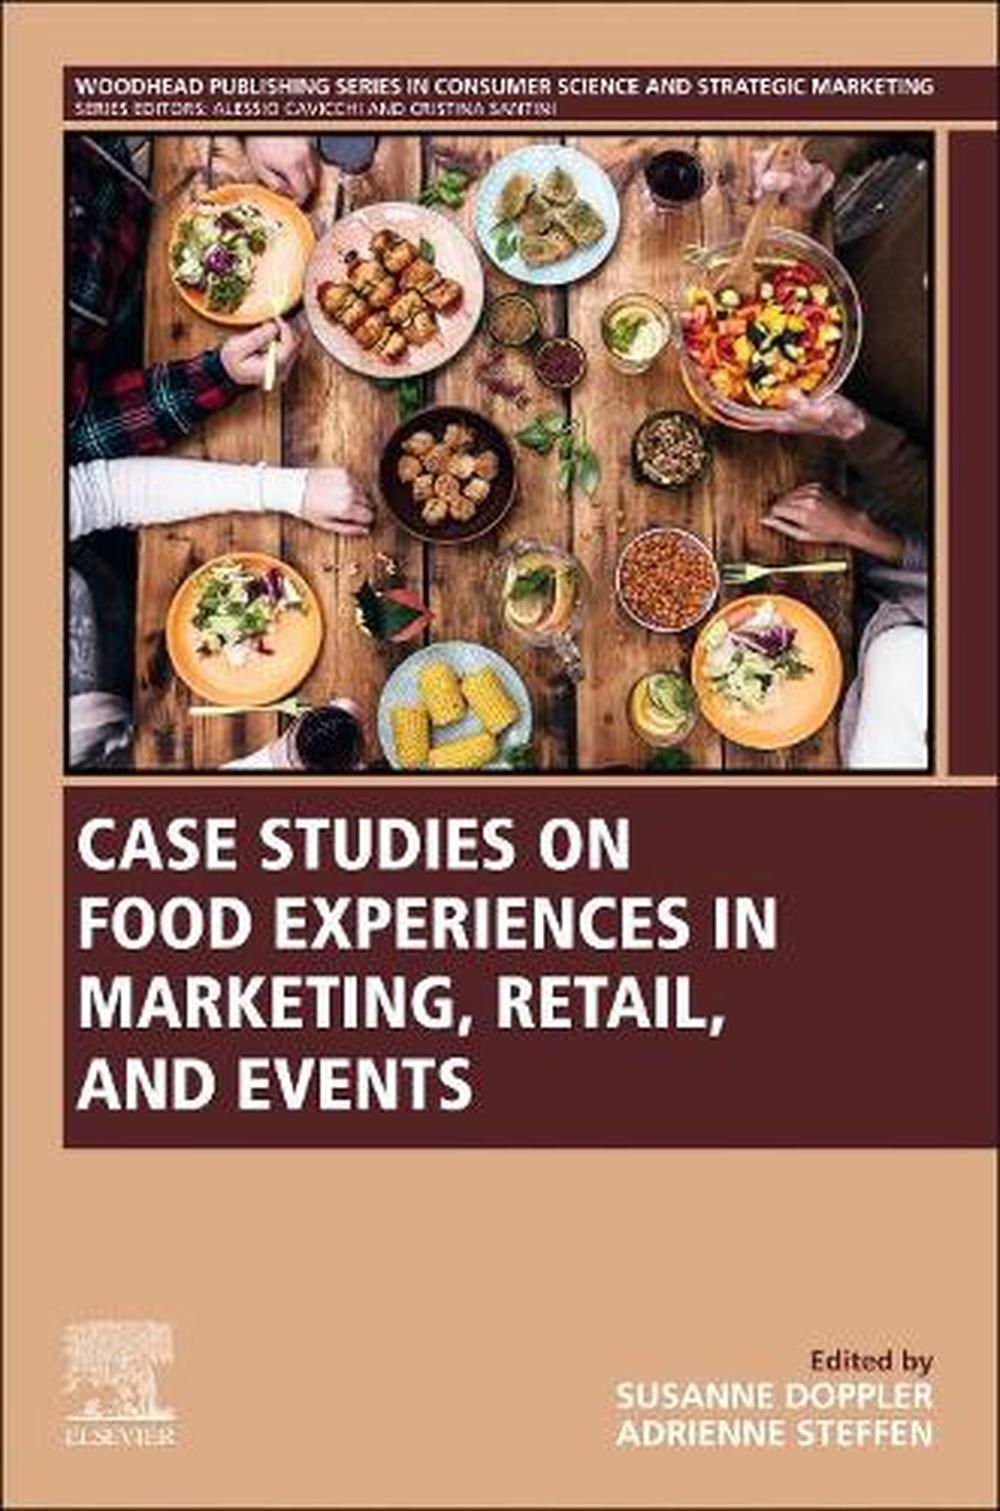 research on food marketing